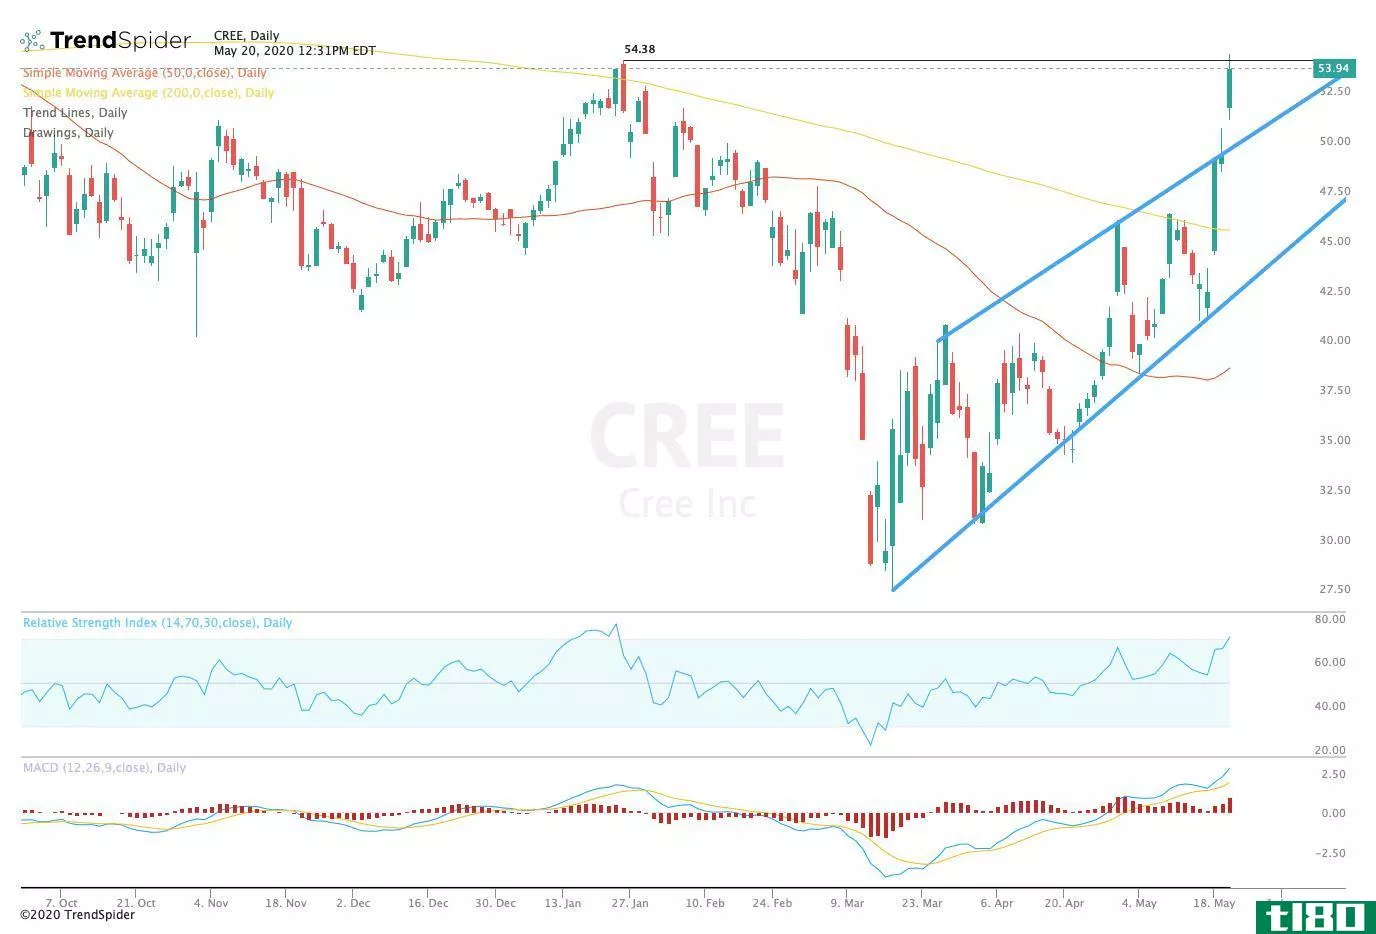 Chart showing the share price performance of Cree, Inc. (CREE)